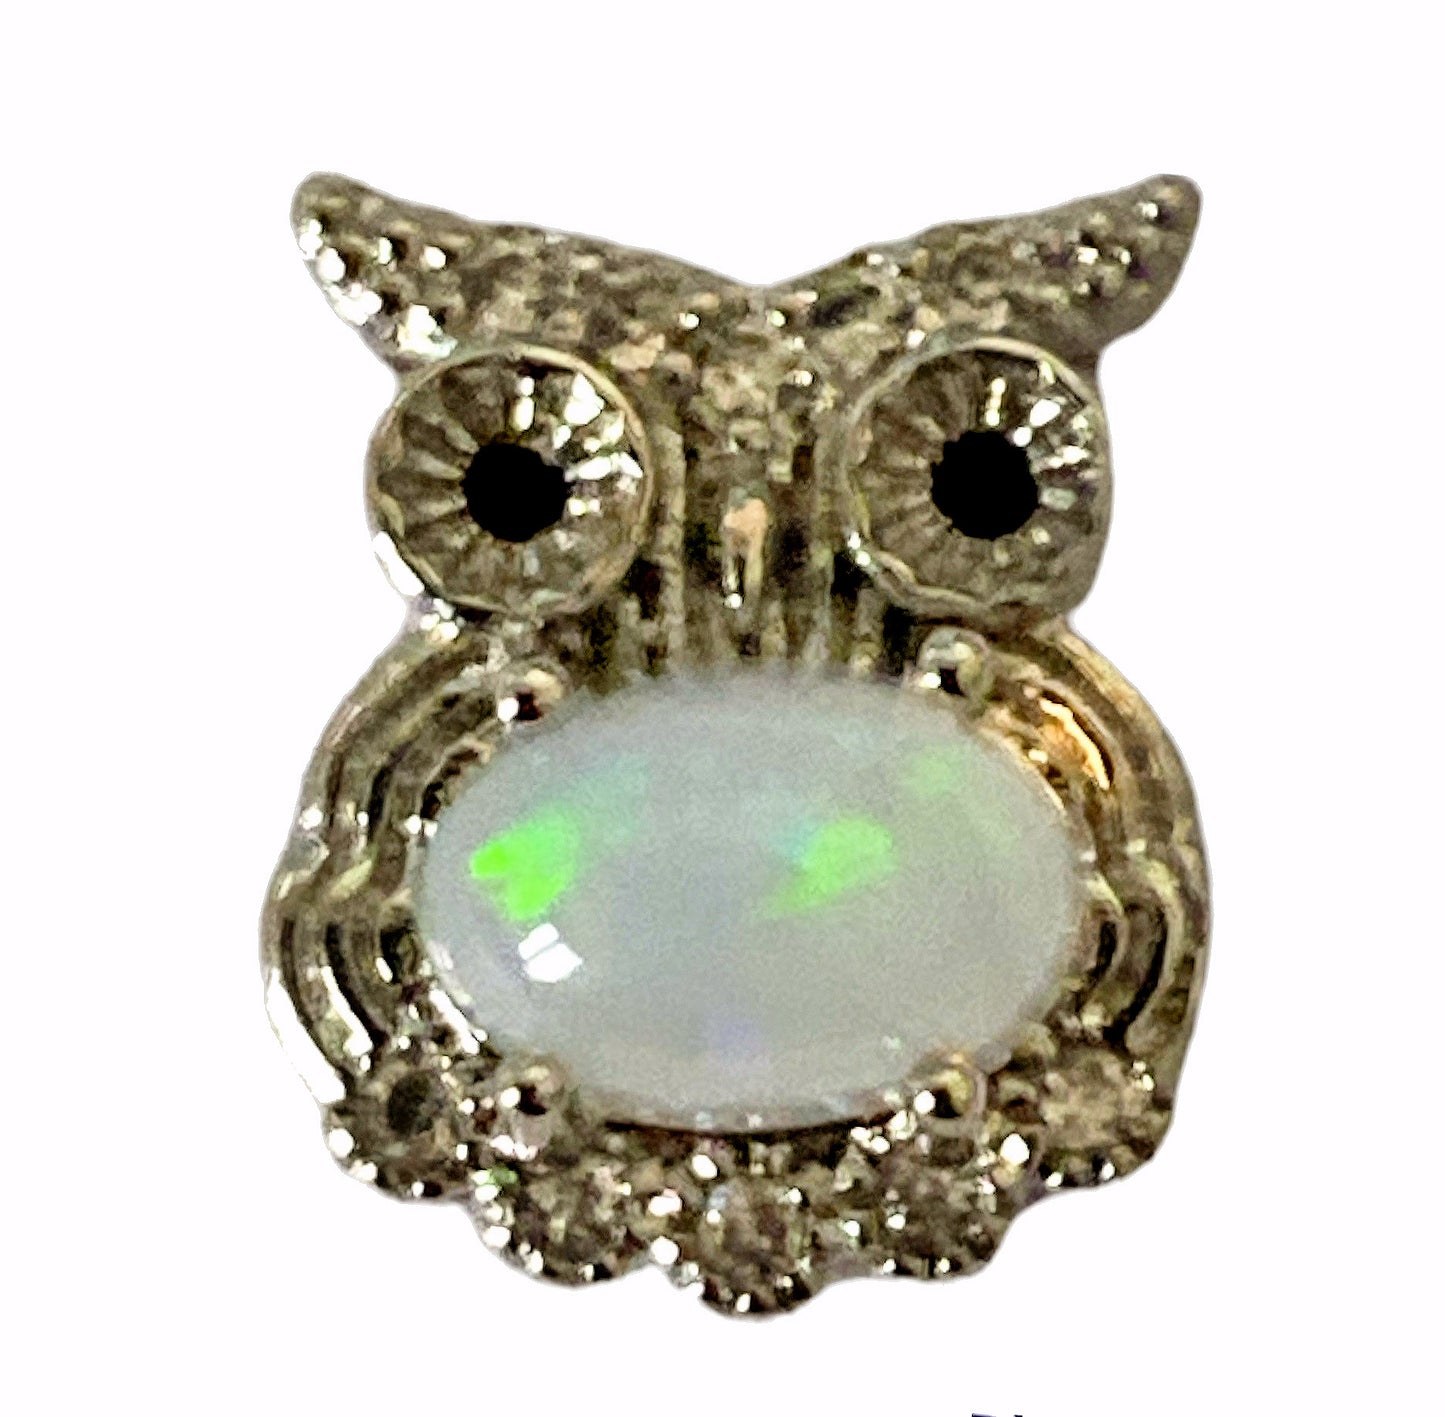 Opal OWL Pendant with Rhinestones - Silver Color Plated Metal - 10x8mm - China - NEW922